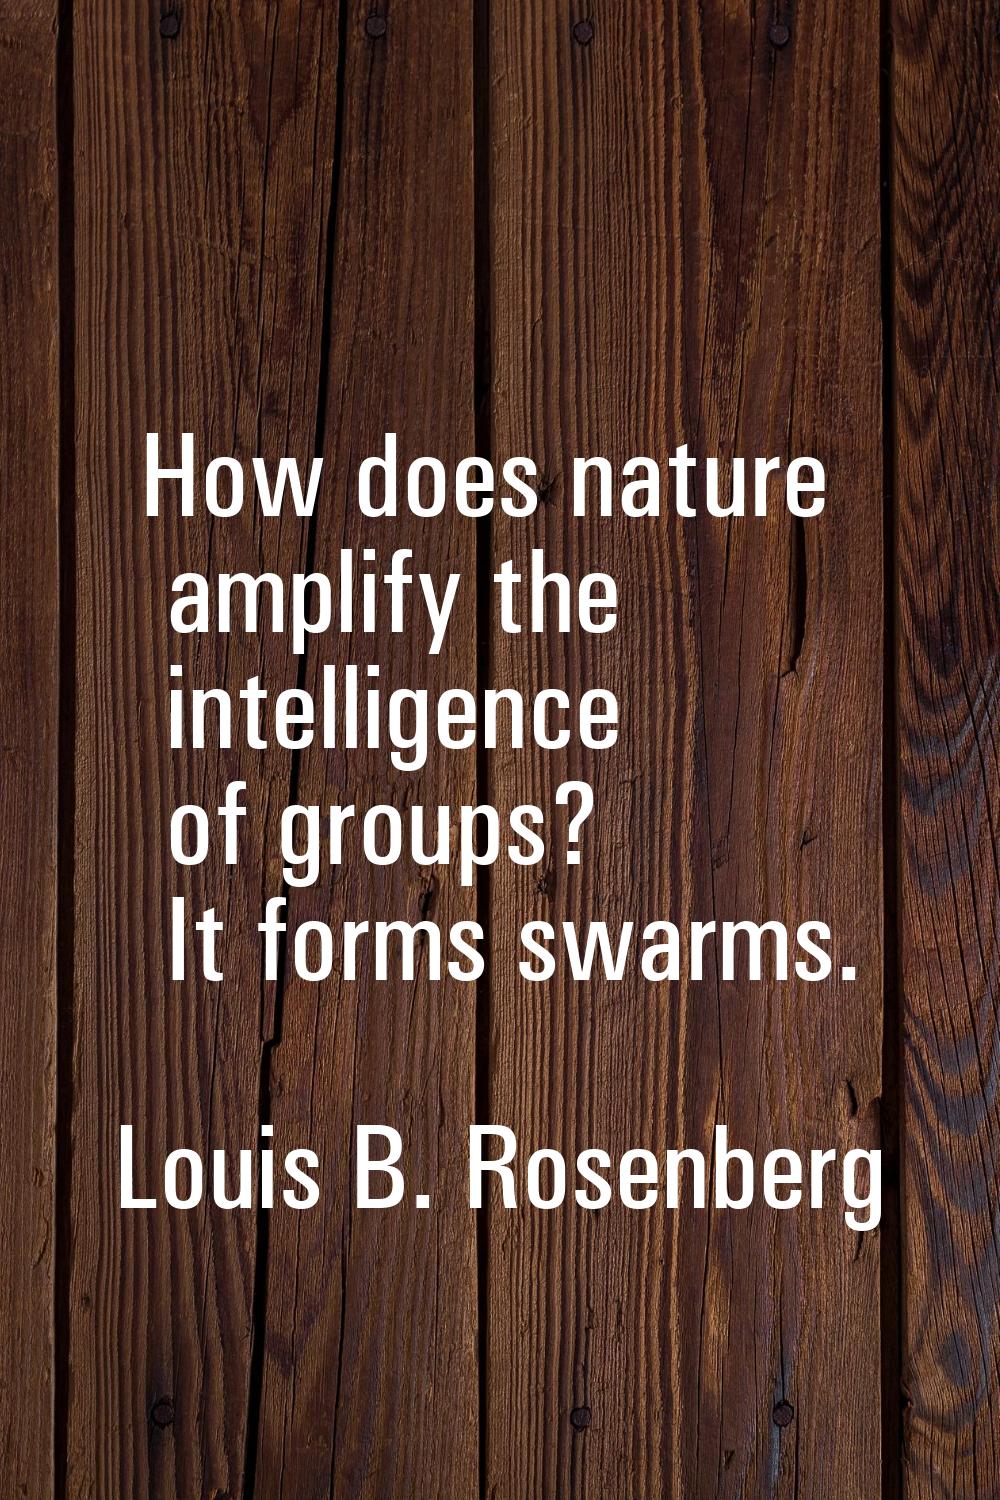 How does nature amplify the intelligence of groups? It forms swarms.